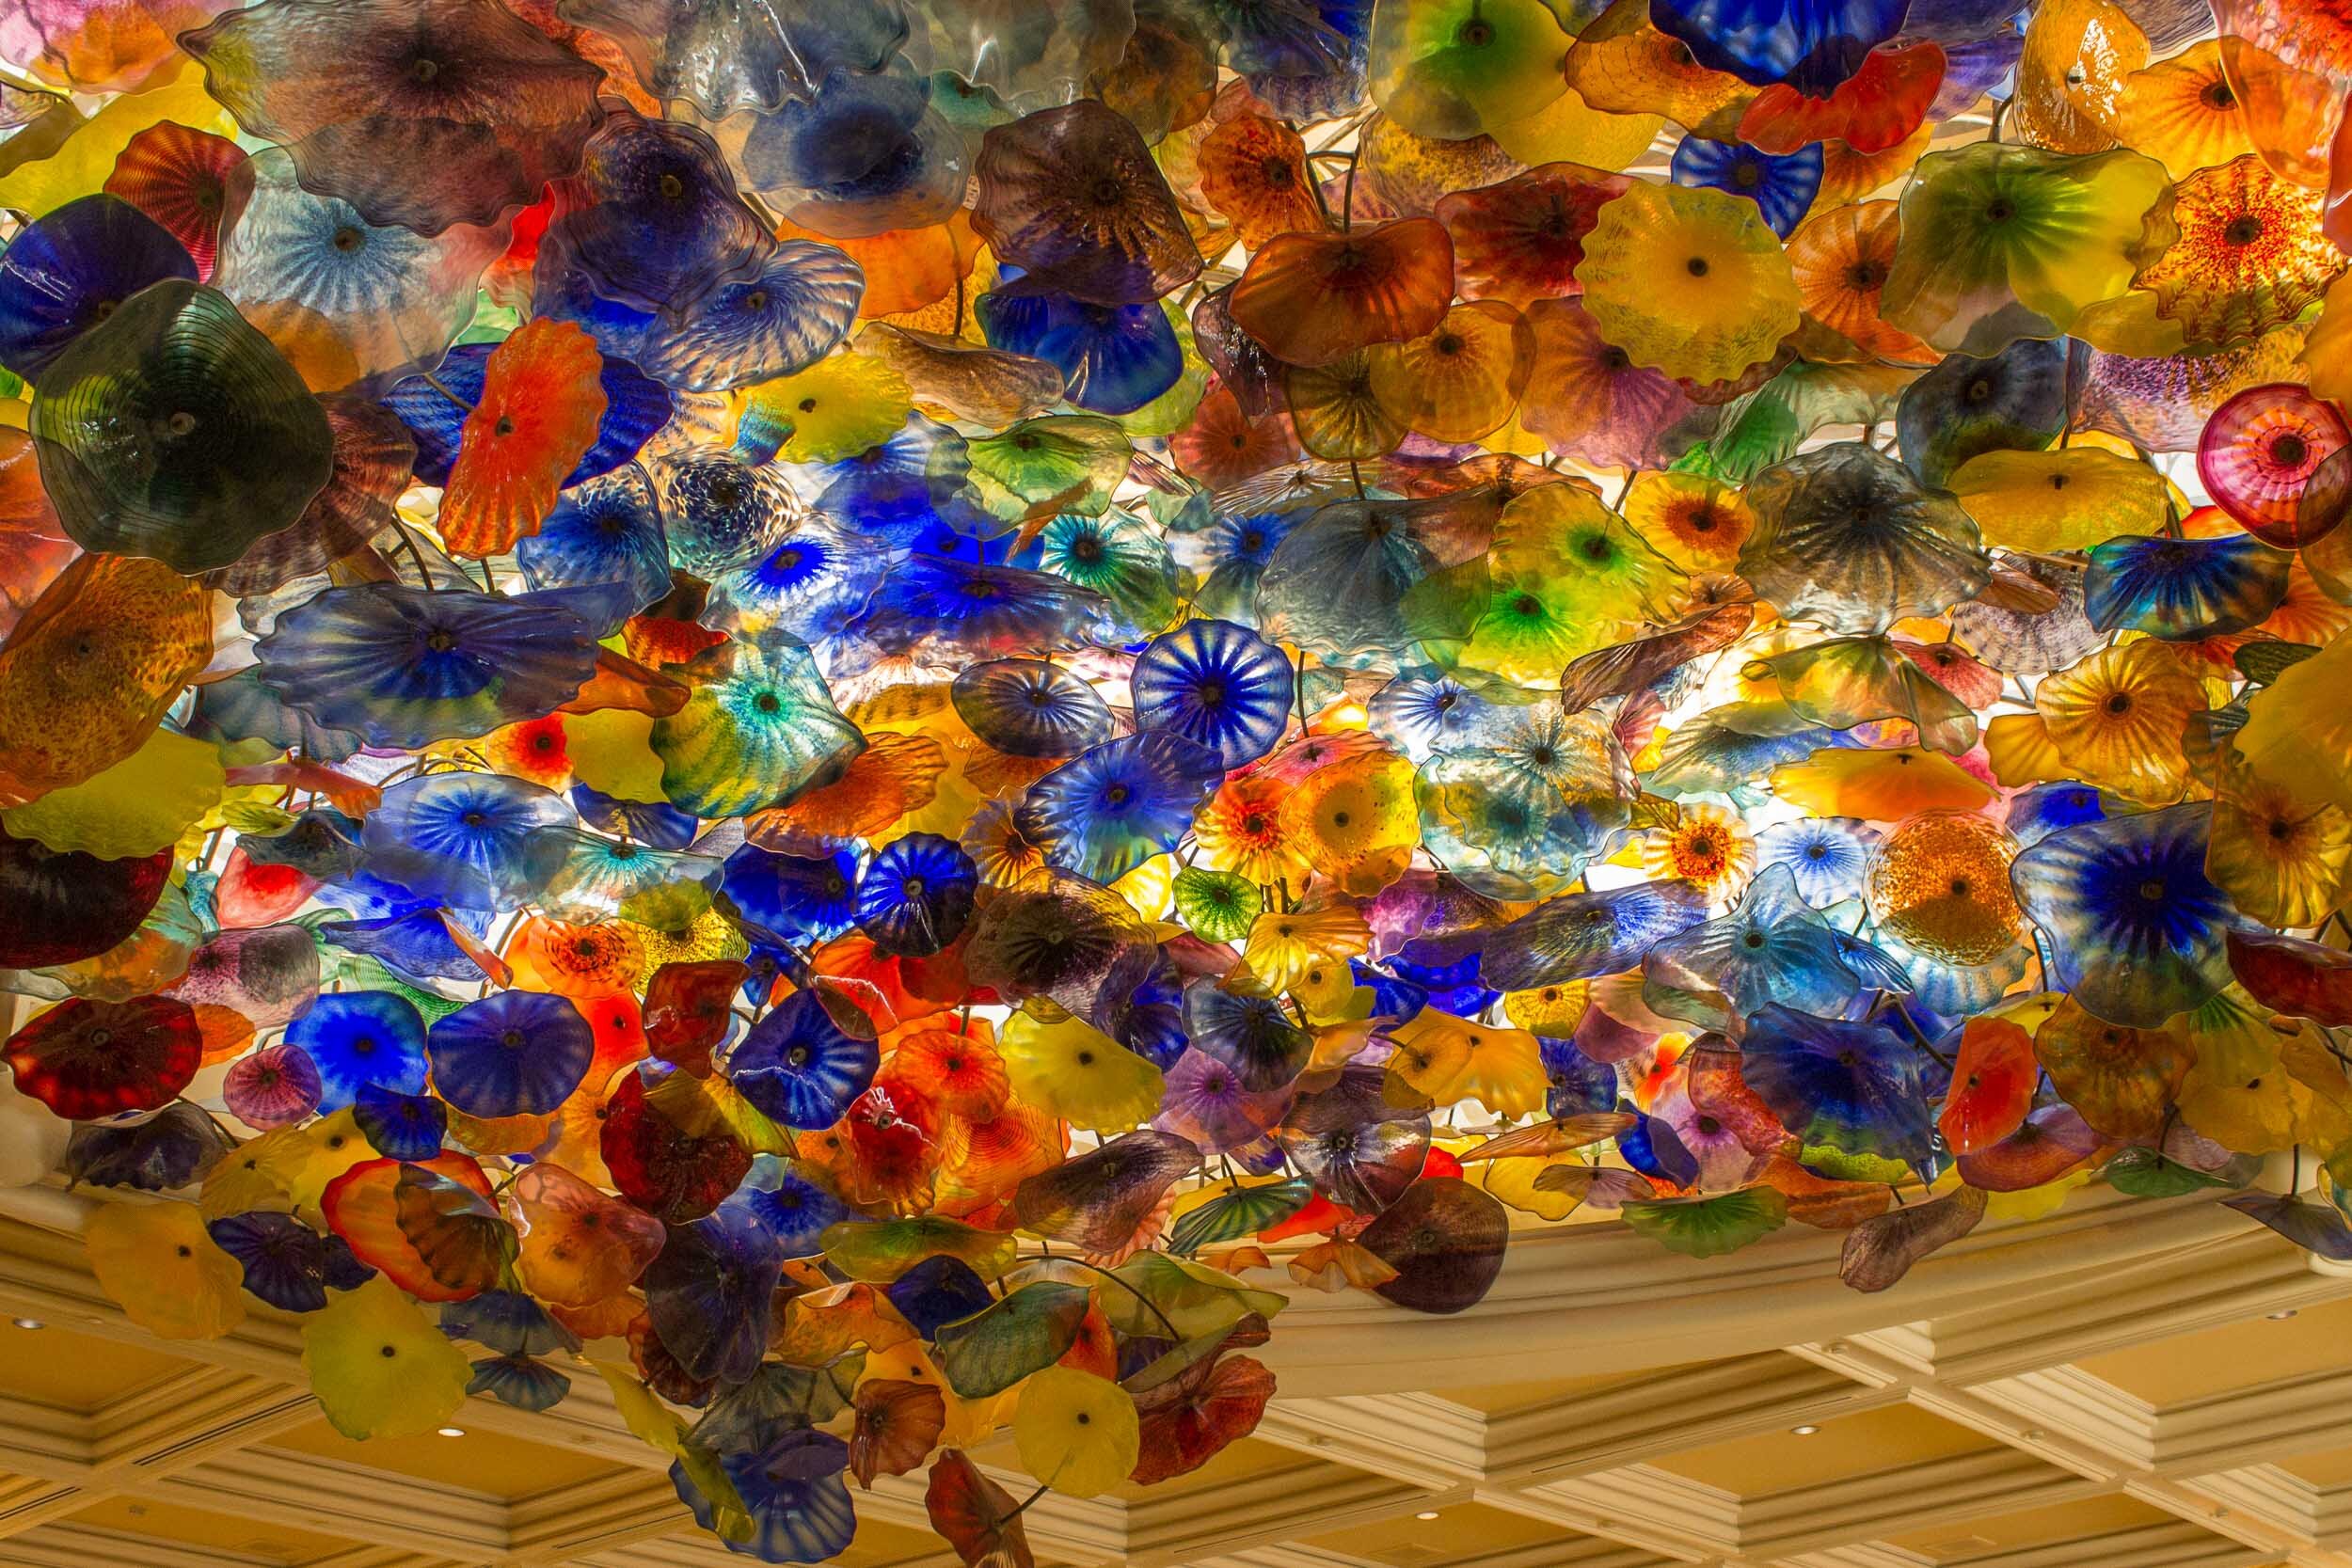 Dale Chihuly Ceiling at Bellagio